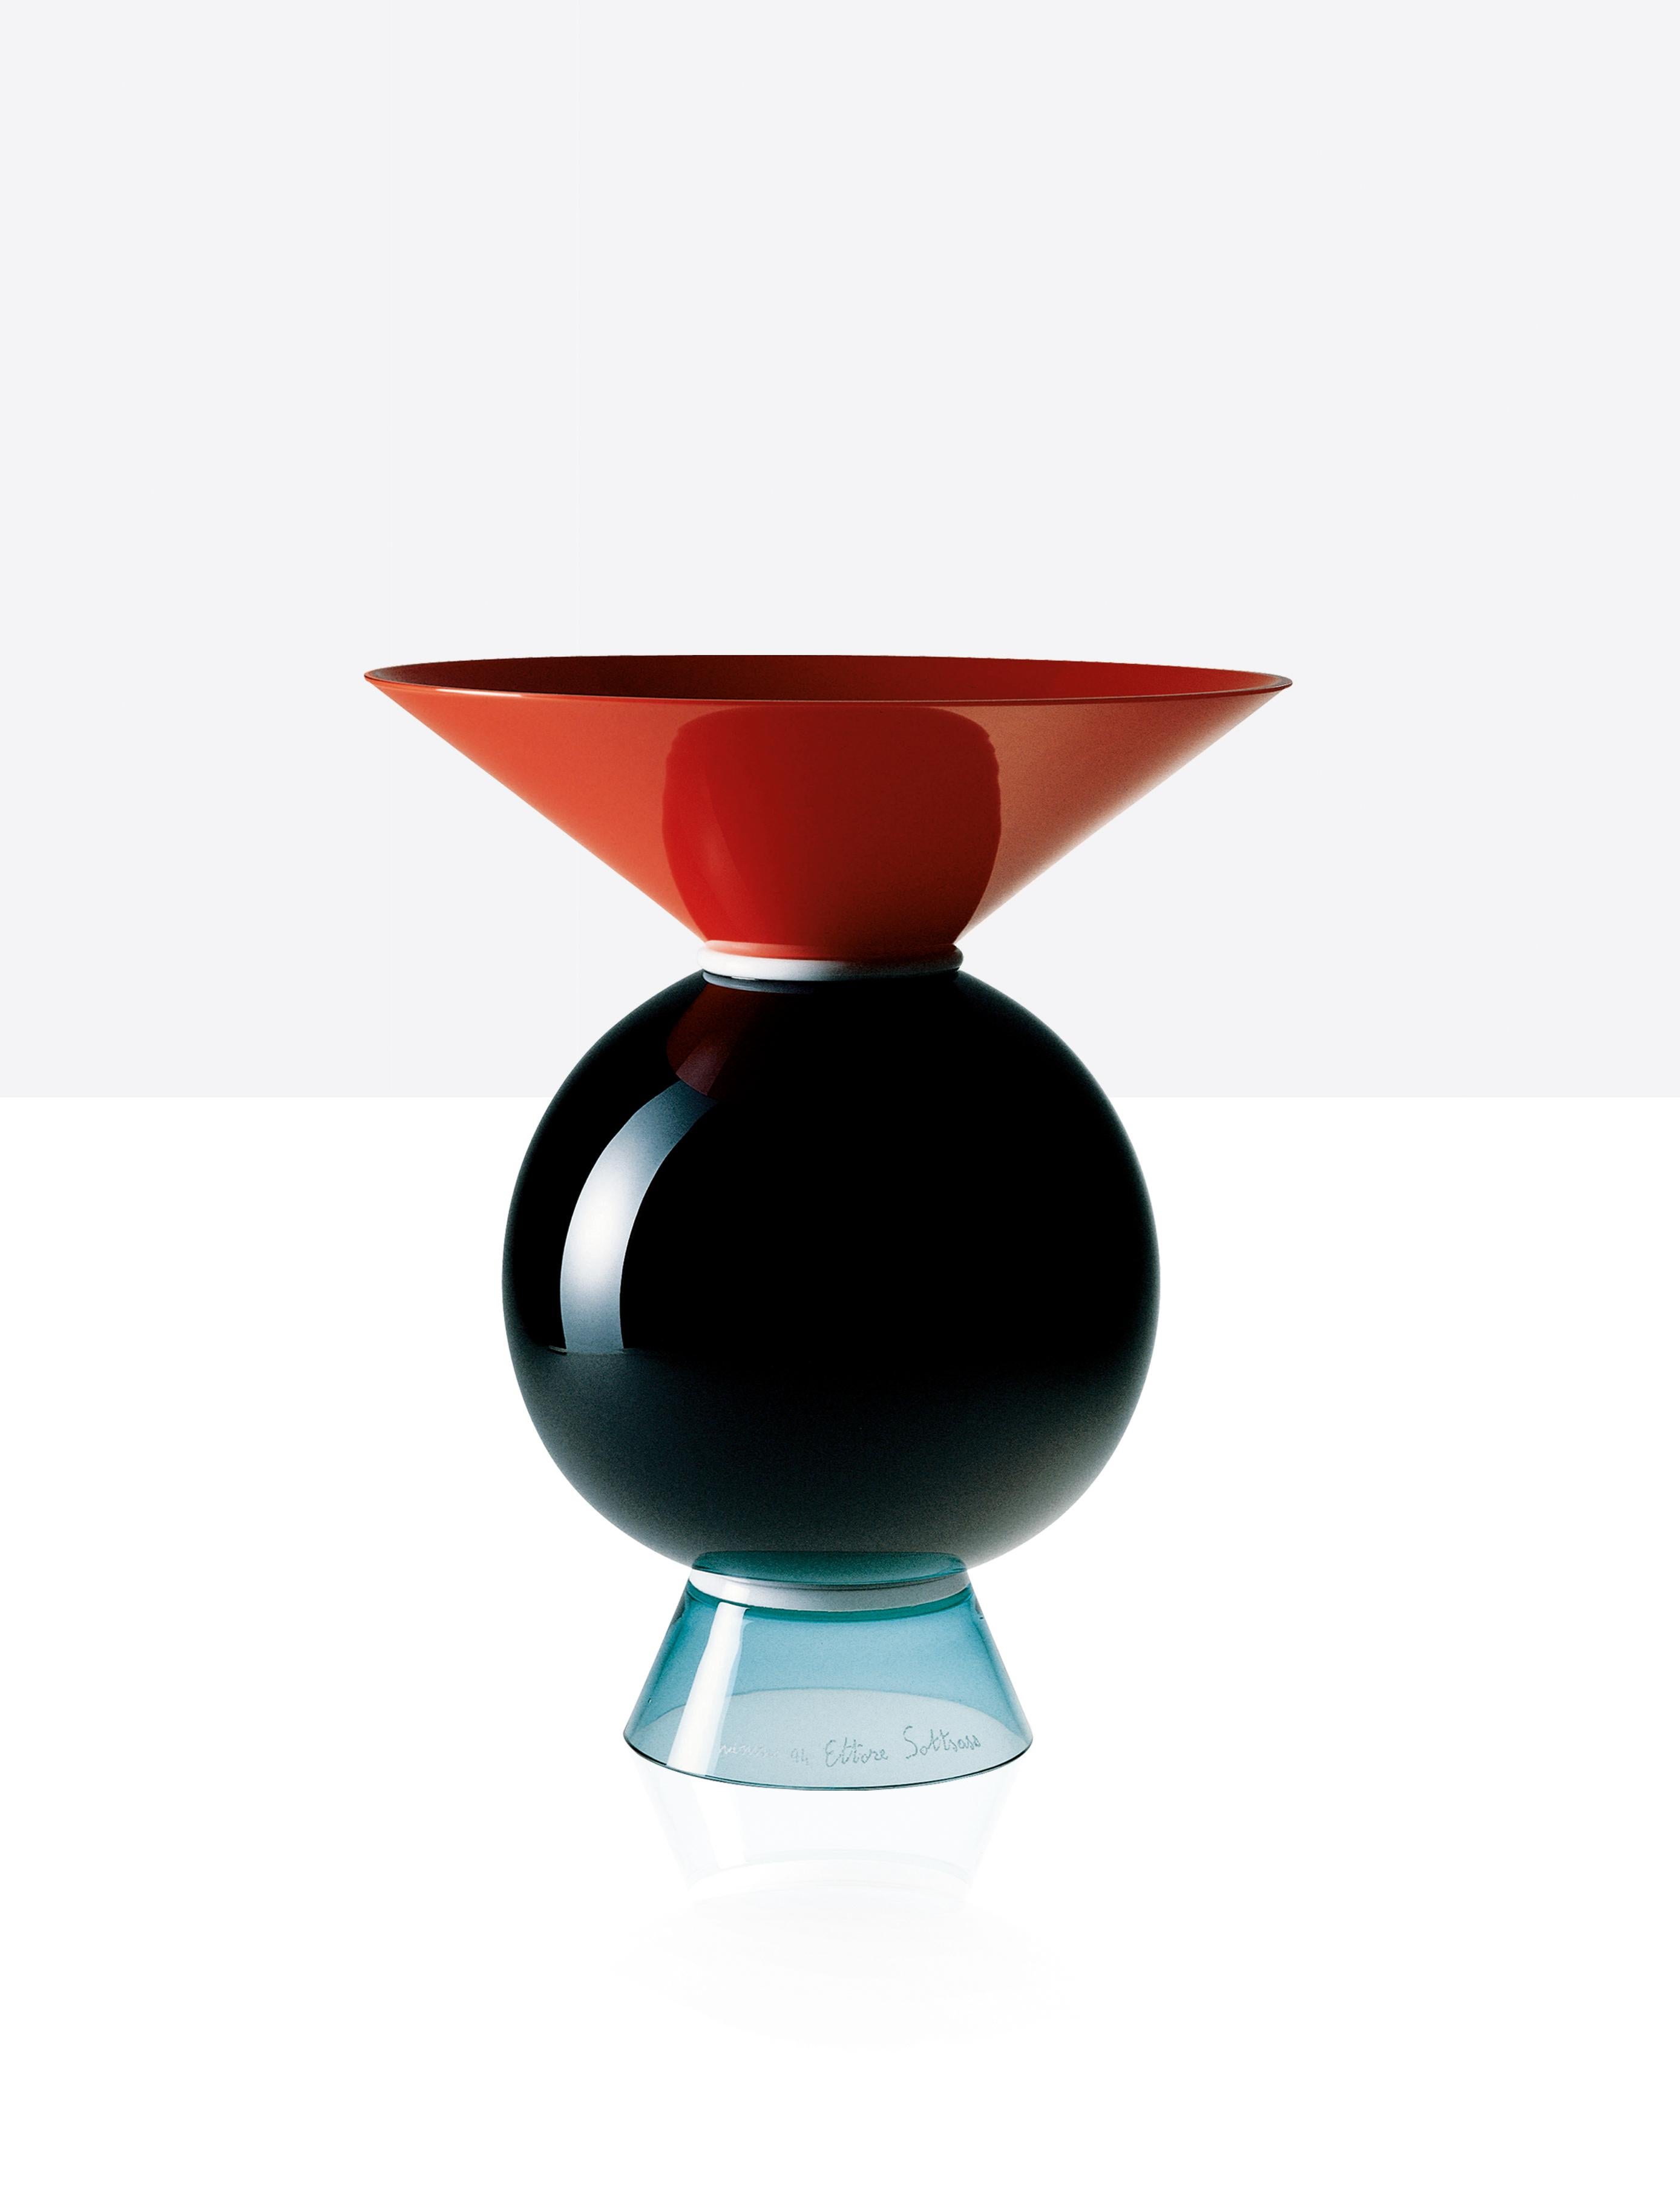 Venini glass vase with geometric, circular shaped body and triangular neck and base. Designed by Ettore Sottsass in 1994. Featured in coral red, milk-white, black and light green colored glass. Perfect for indoor home decor as container or strong